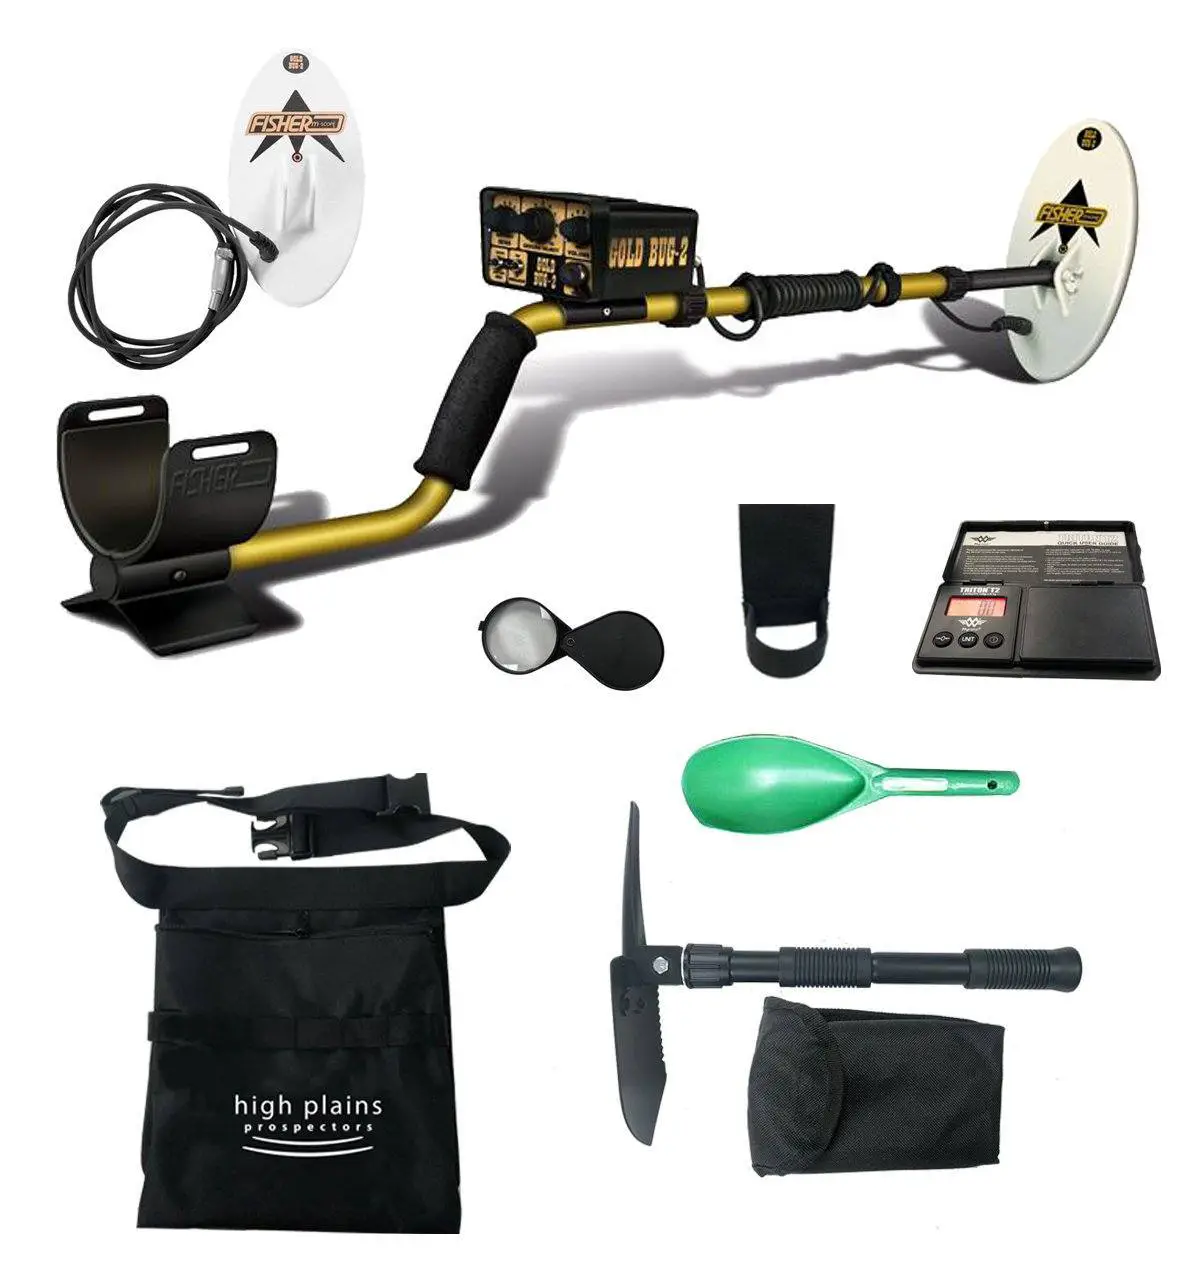 Fisher Gold Bug 2 metal detector and accessories.